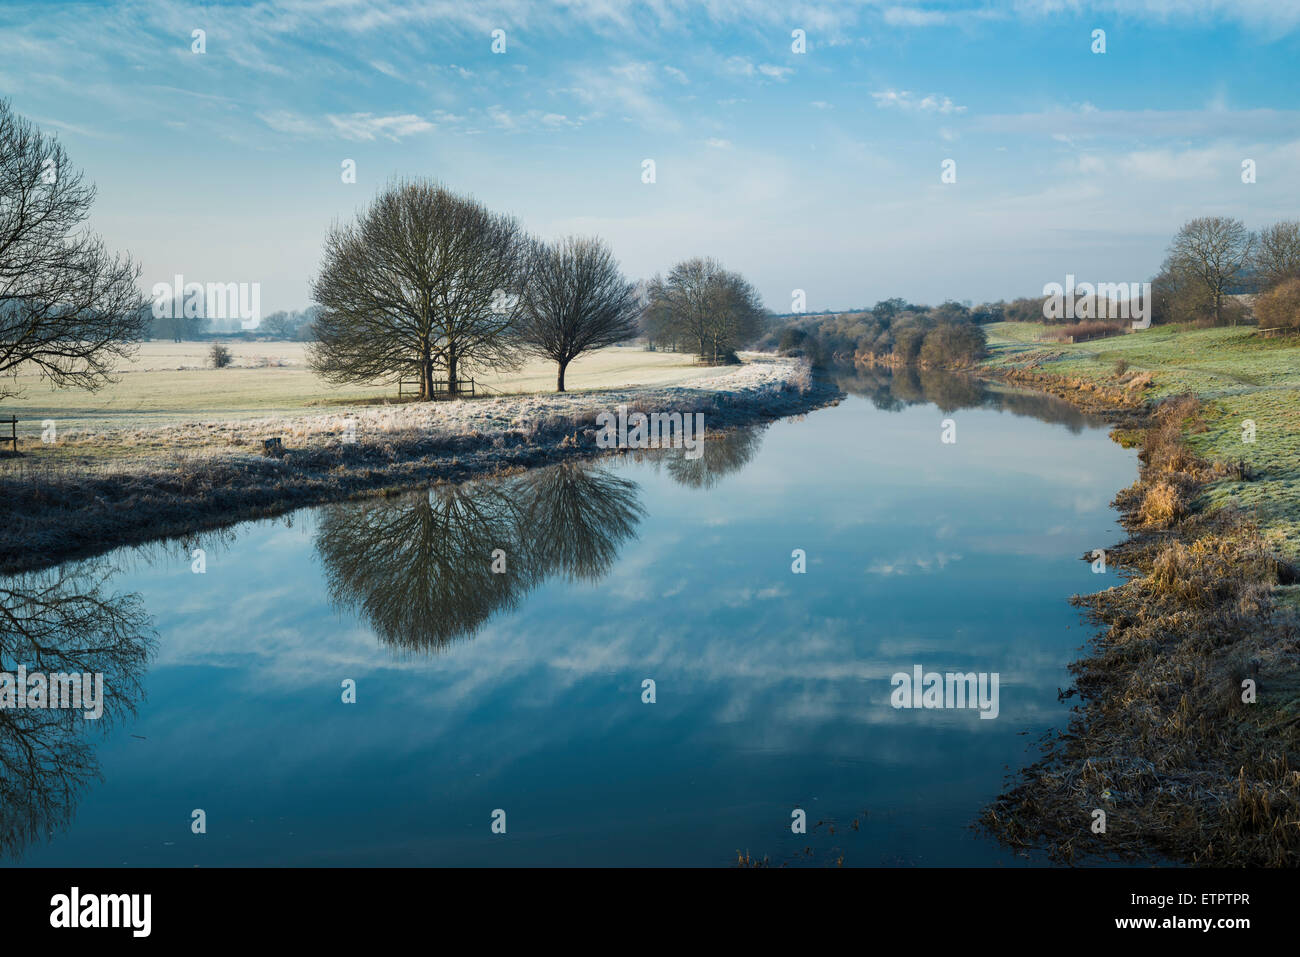 The River Nene on an icy cold January day, Peterborough, Cambridgeshire, England Stock Photo